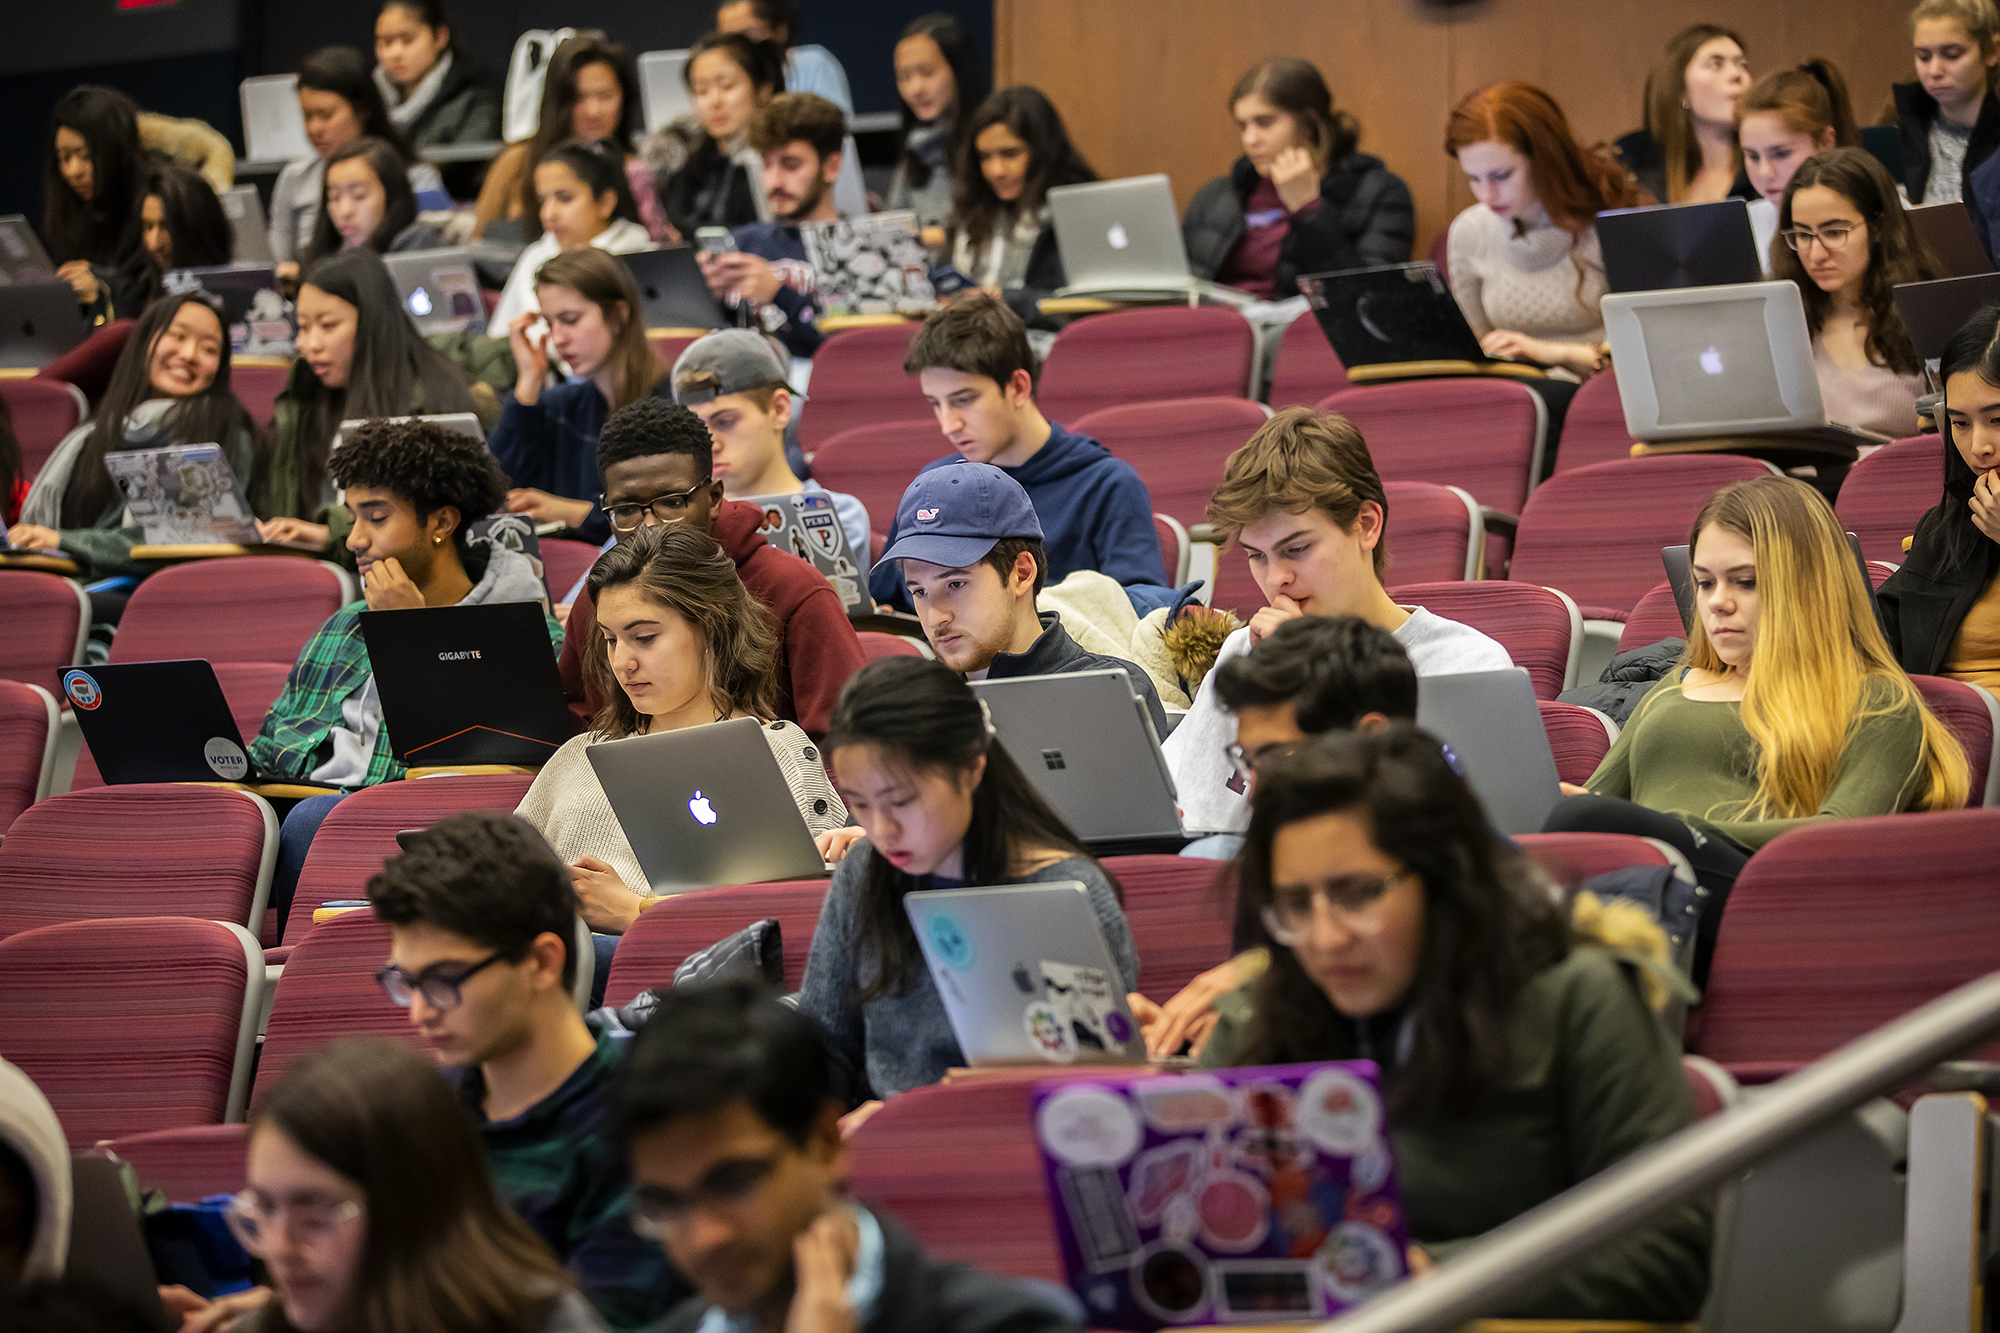 Students in an auditorium working on their laptops